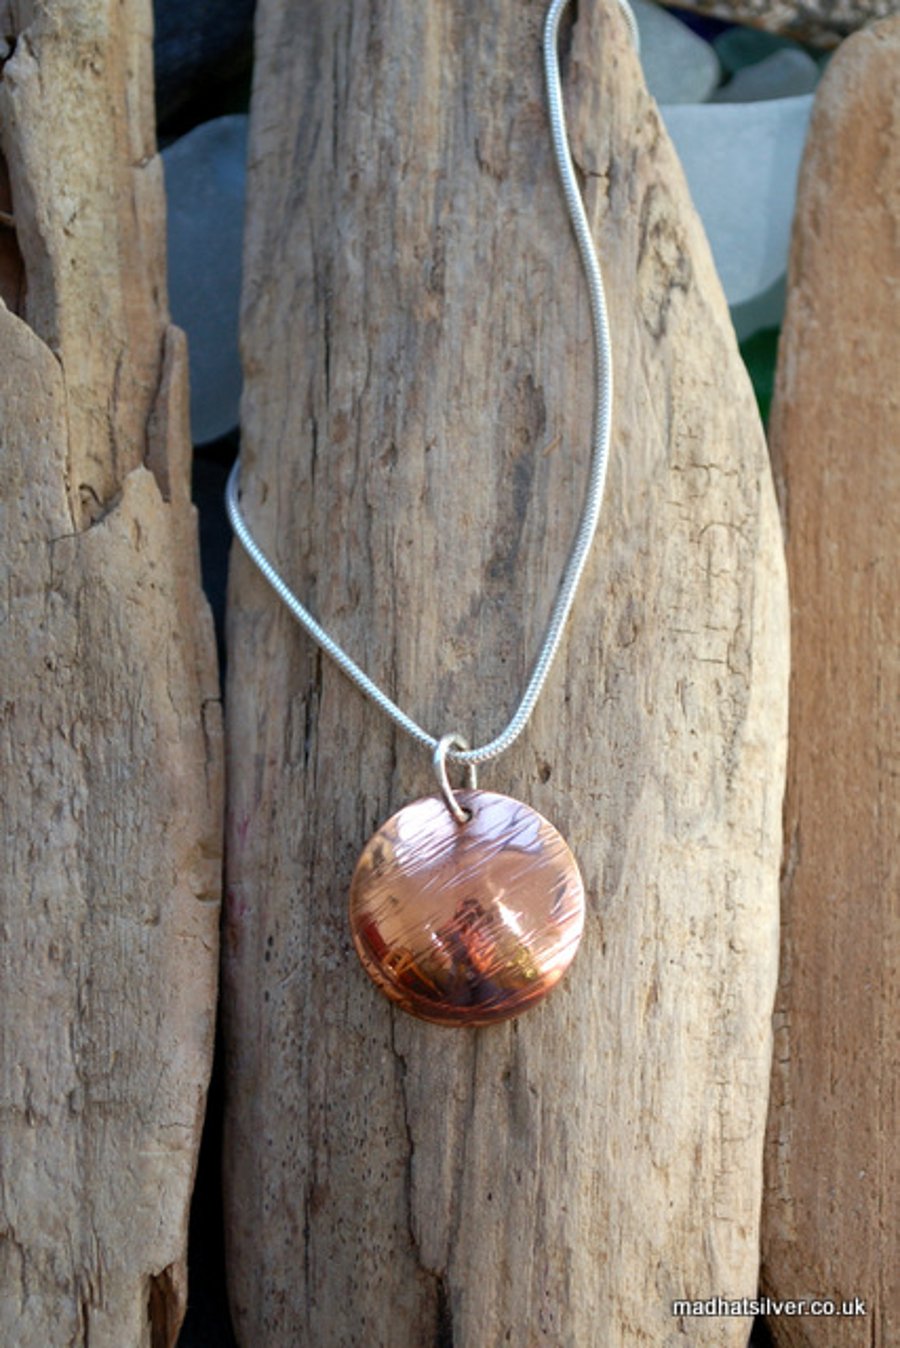 Domed, textured copper pendant on silver chain